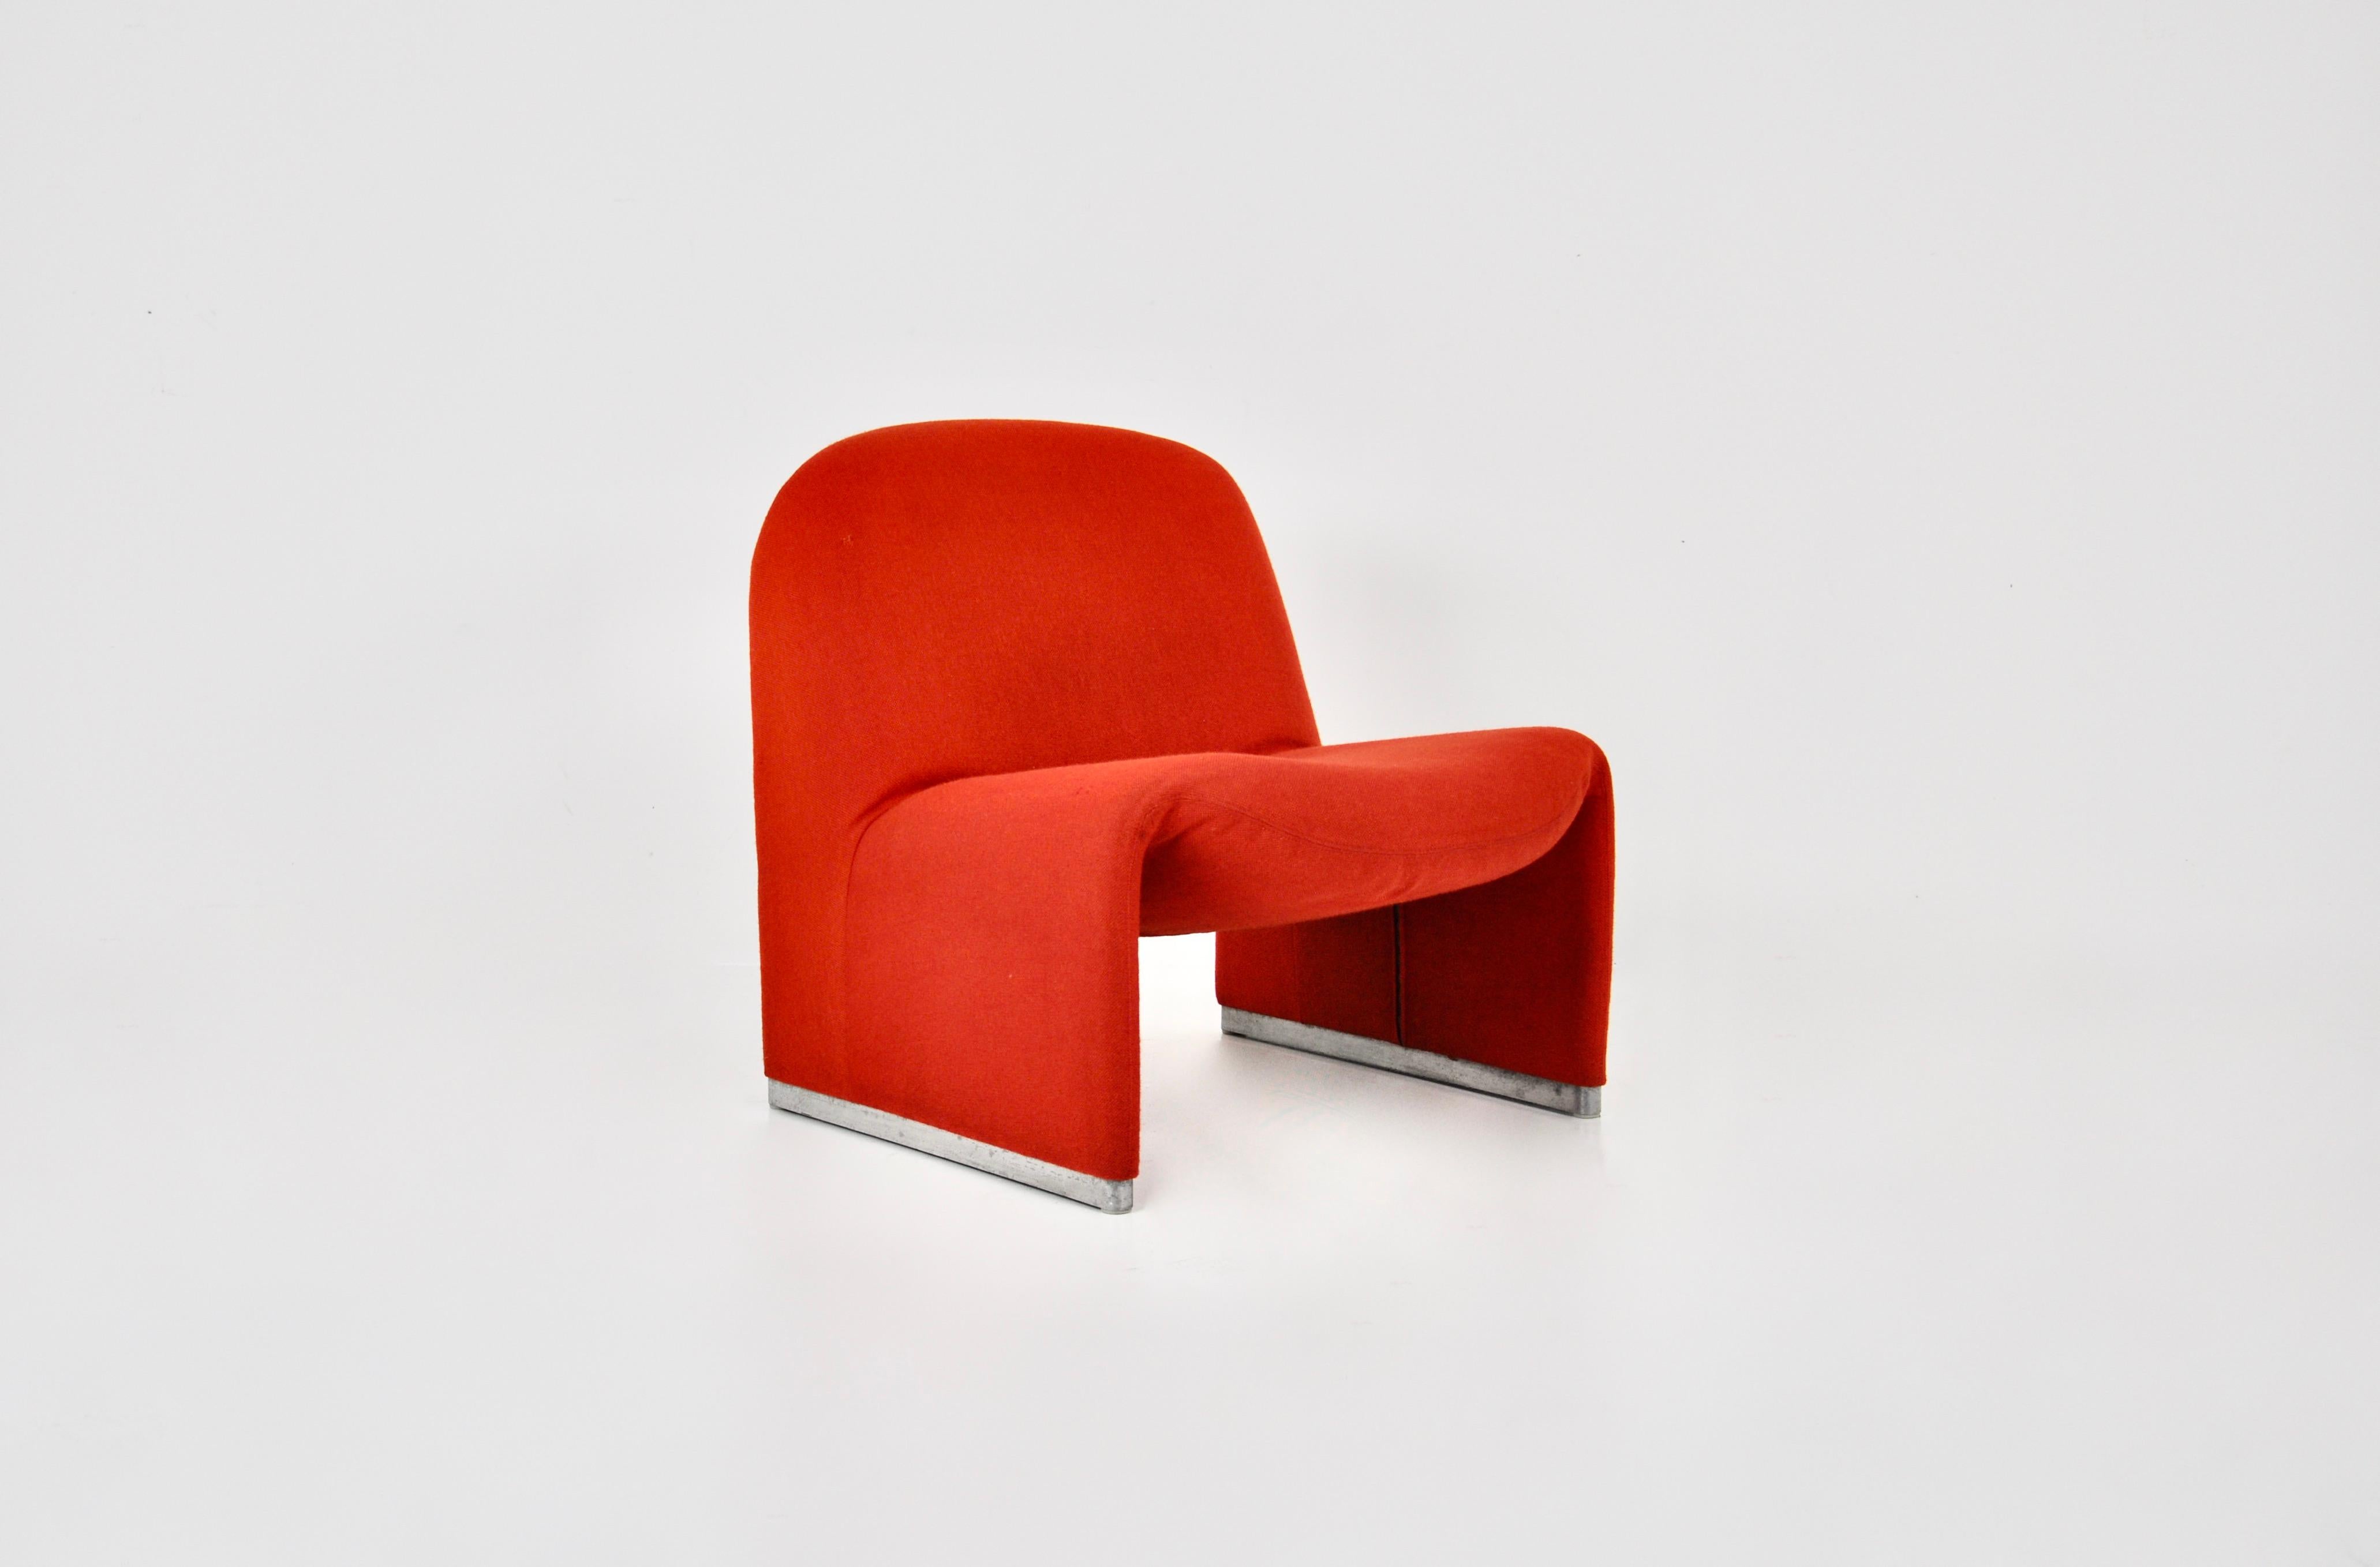 Armchair in red fabric.  Model: Alky. Seat height: 39 cm. Wear due to time and age.